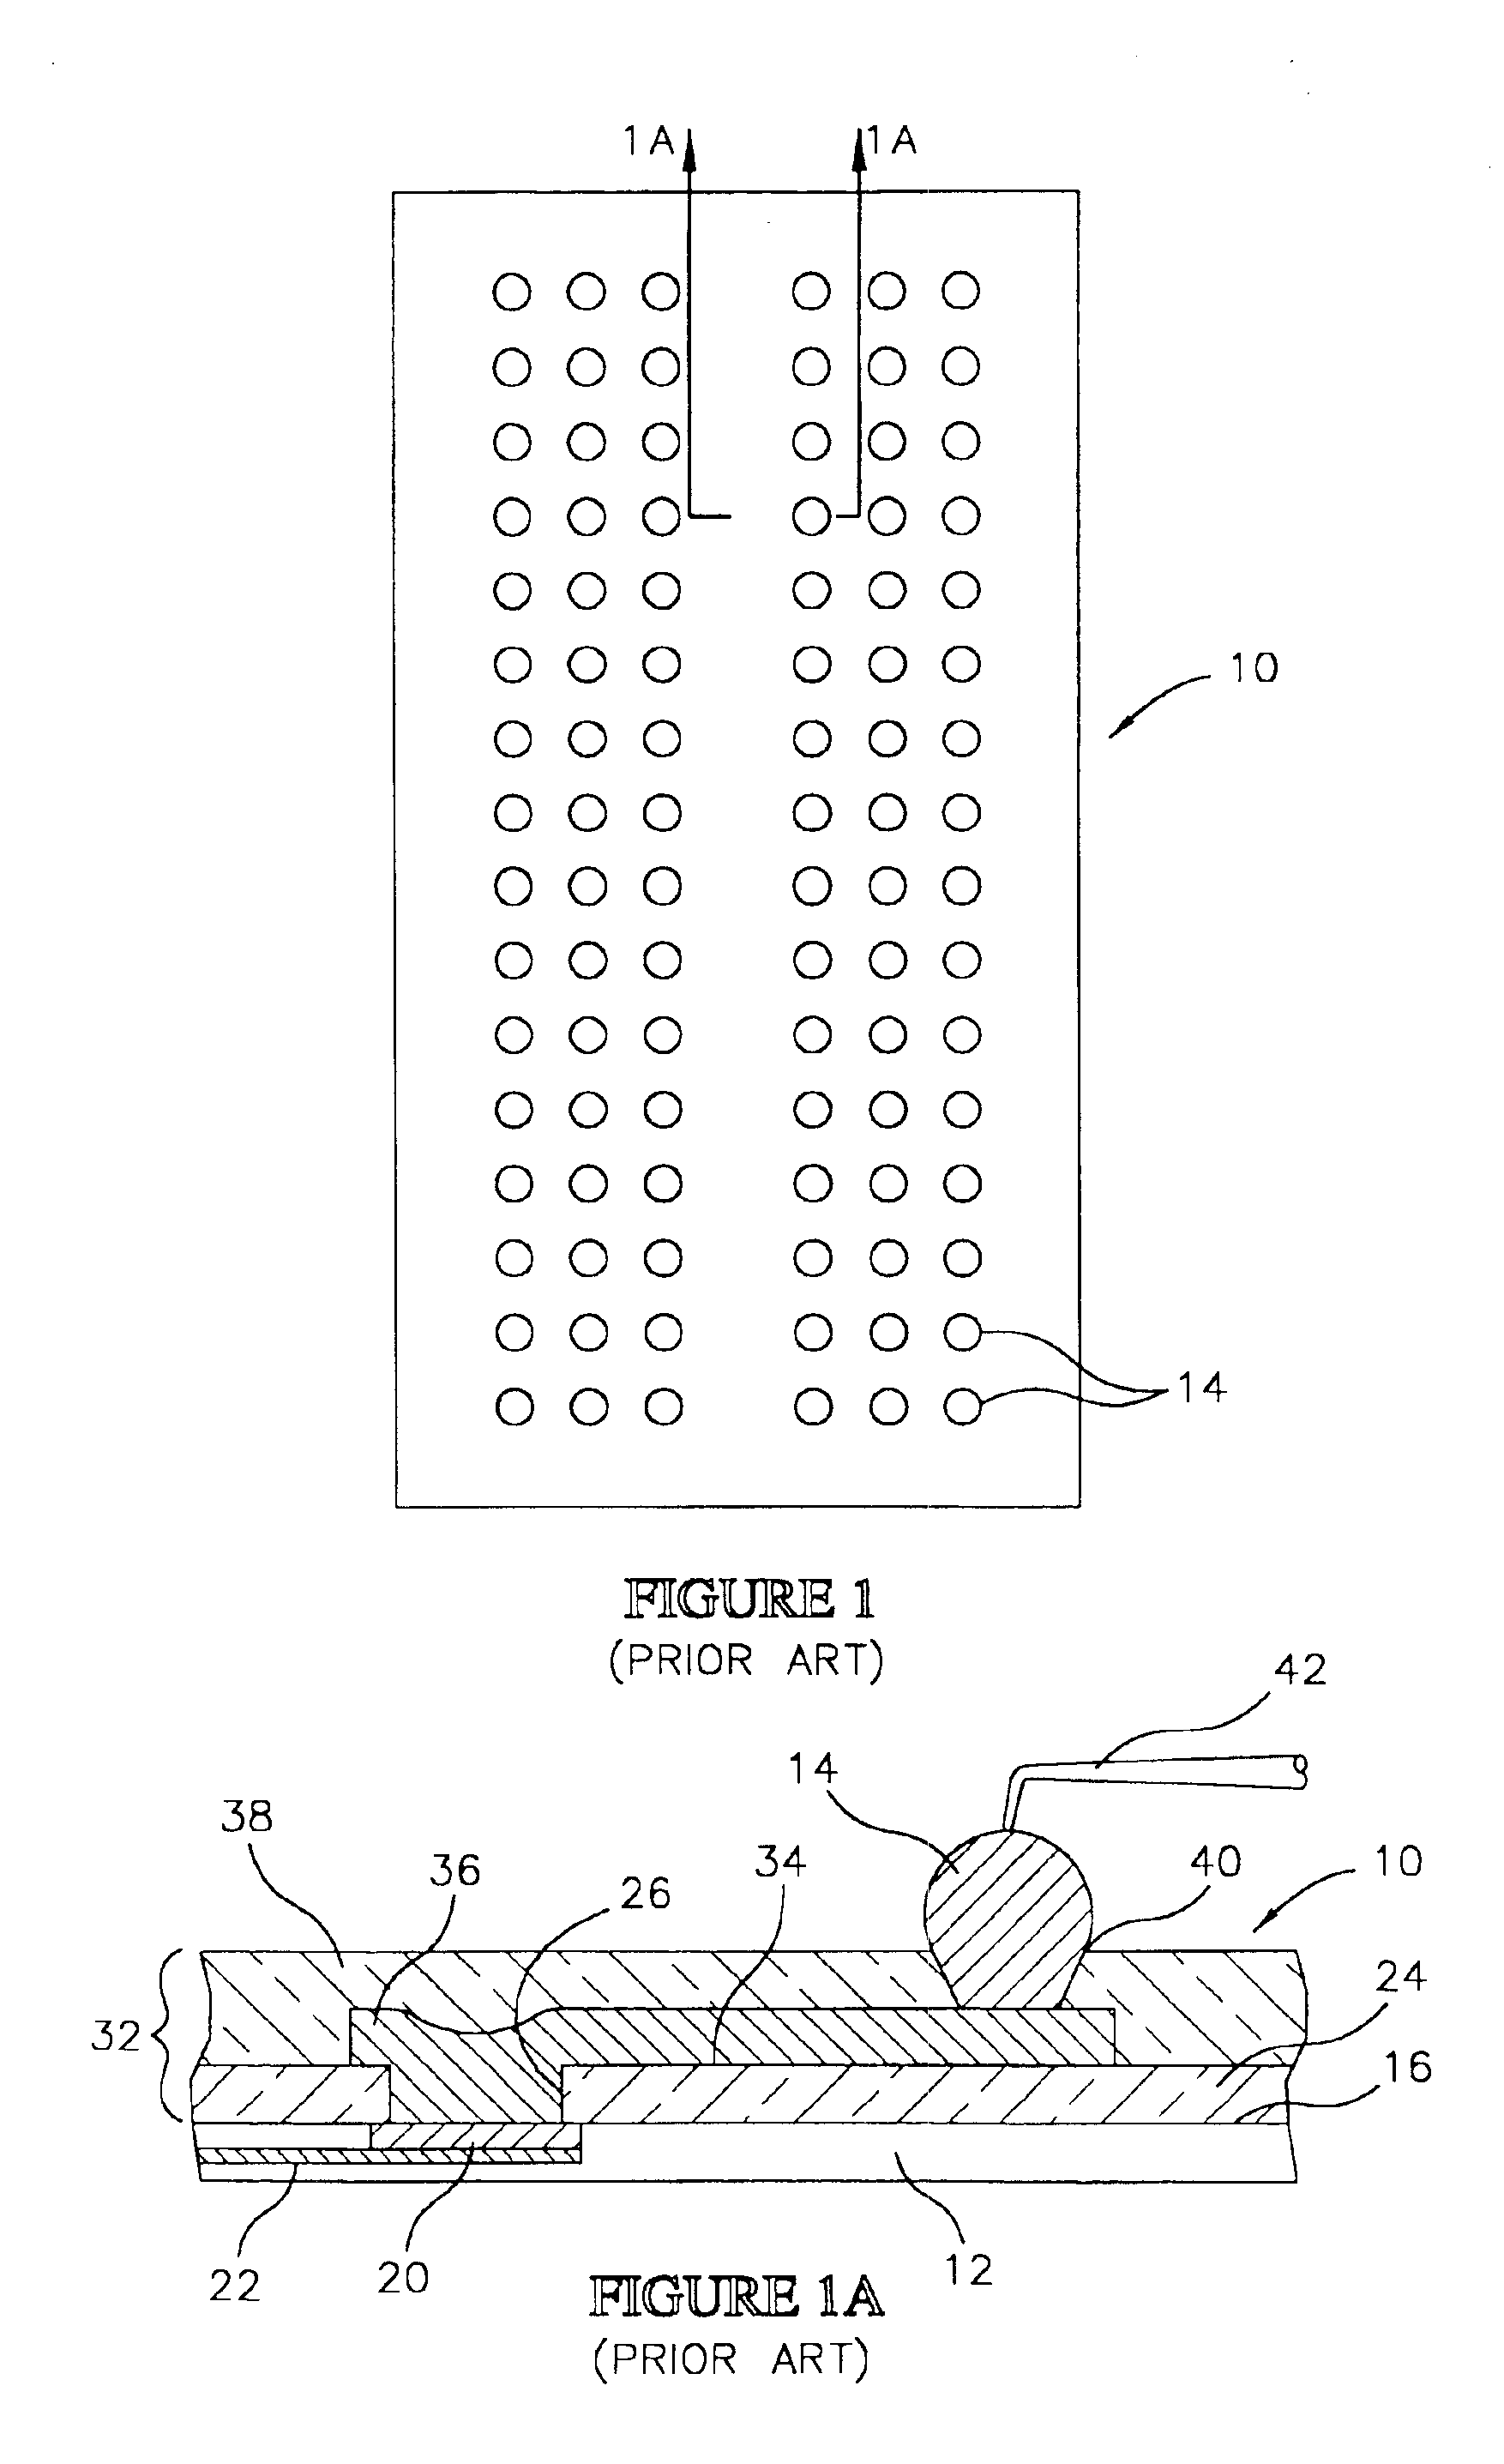 Semiconductor component having test contacts